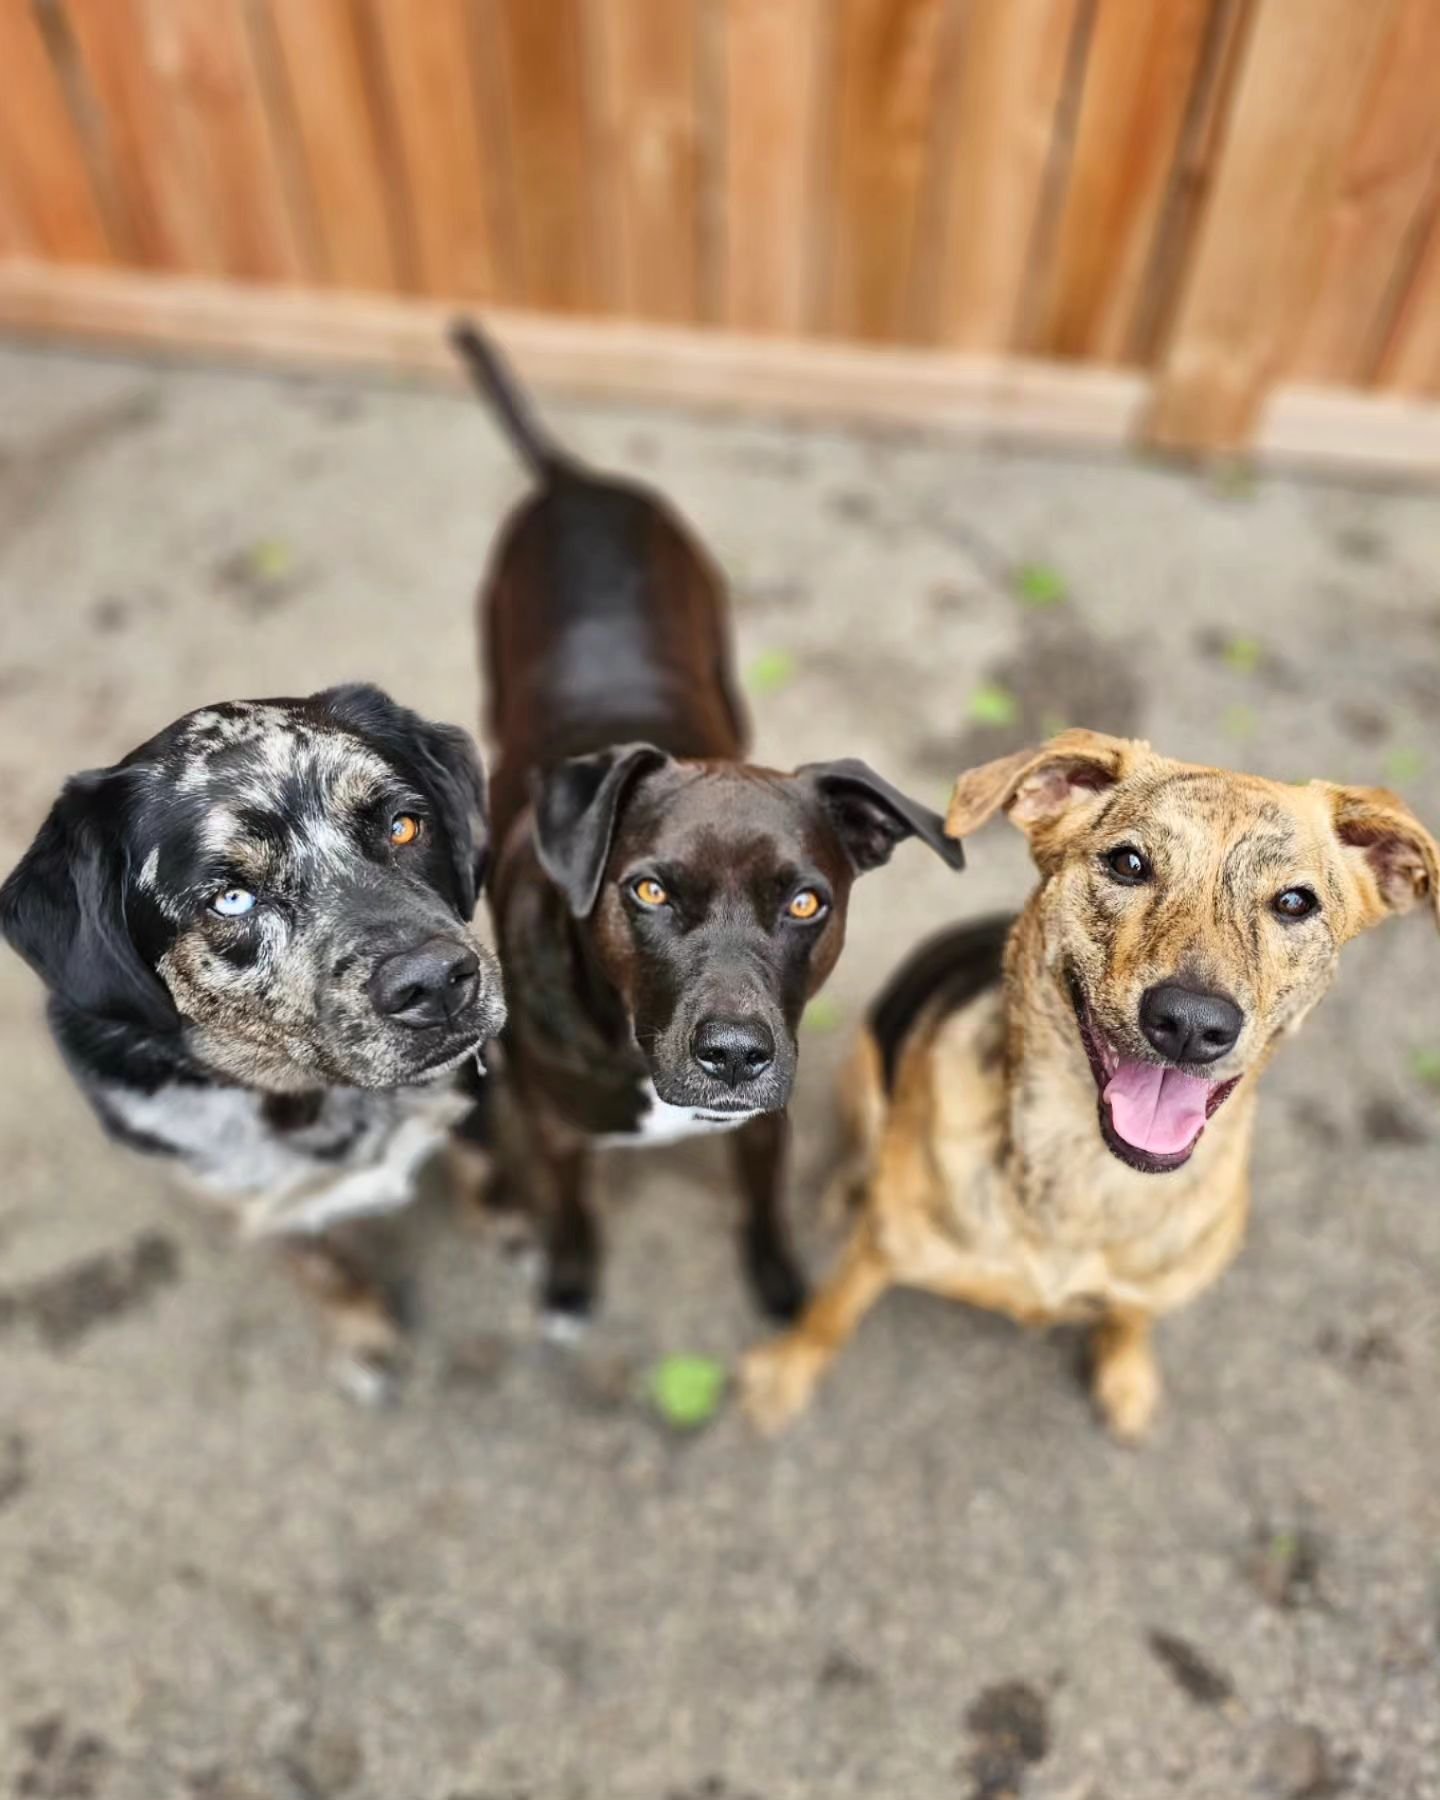 Ralph (black pup) is 6 years old! Happy birthday Ralph, we're so happy to celebrate your birthday with you!

Pictured with Wilson &amp; Rue 🐾

#dogsofig #dogsofinstagram #dogstagram #dogloversfeed #dogloversofinstagram #rufflovedogs #happydog #happi